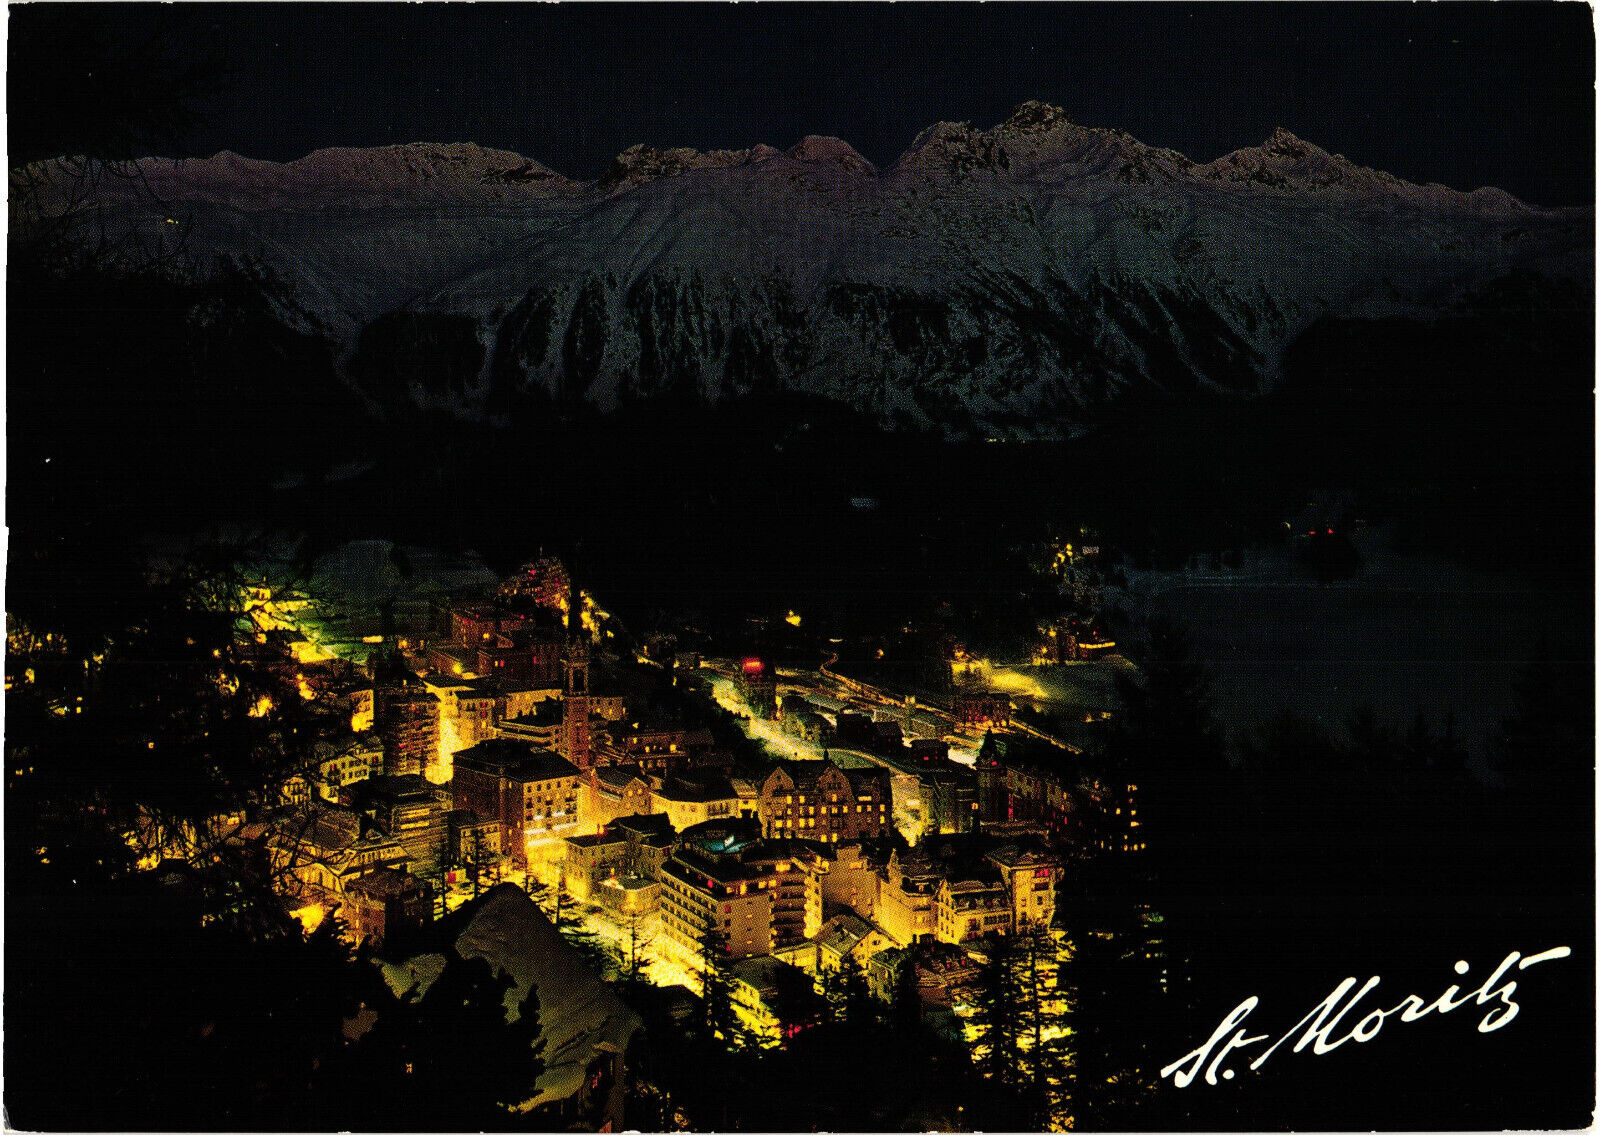 St. Moritz by Night with Mountains and Snow Hans Steiner St. Moritz Postcard